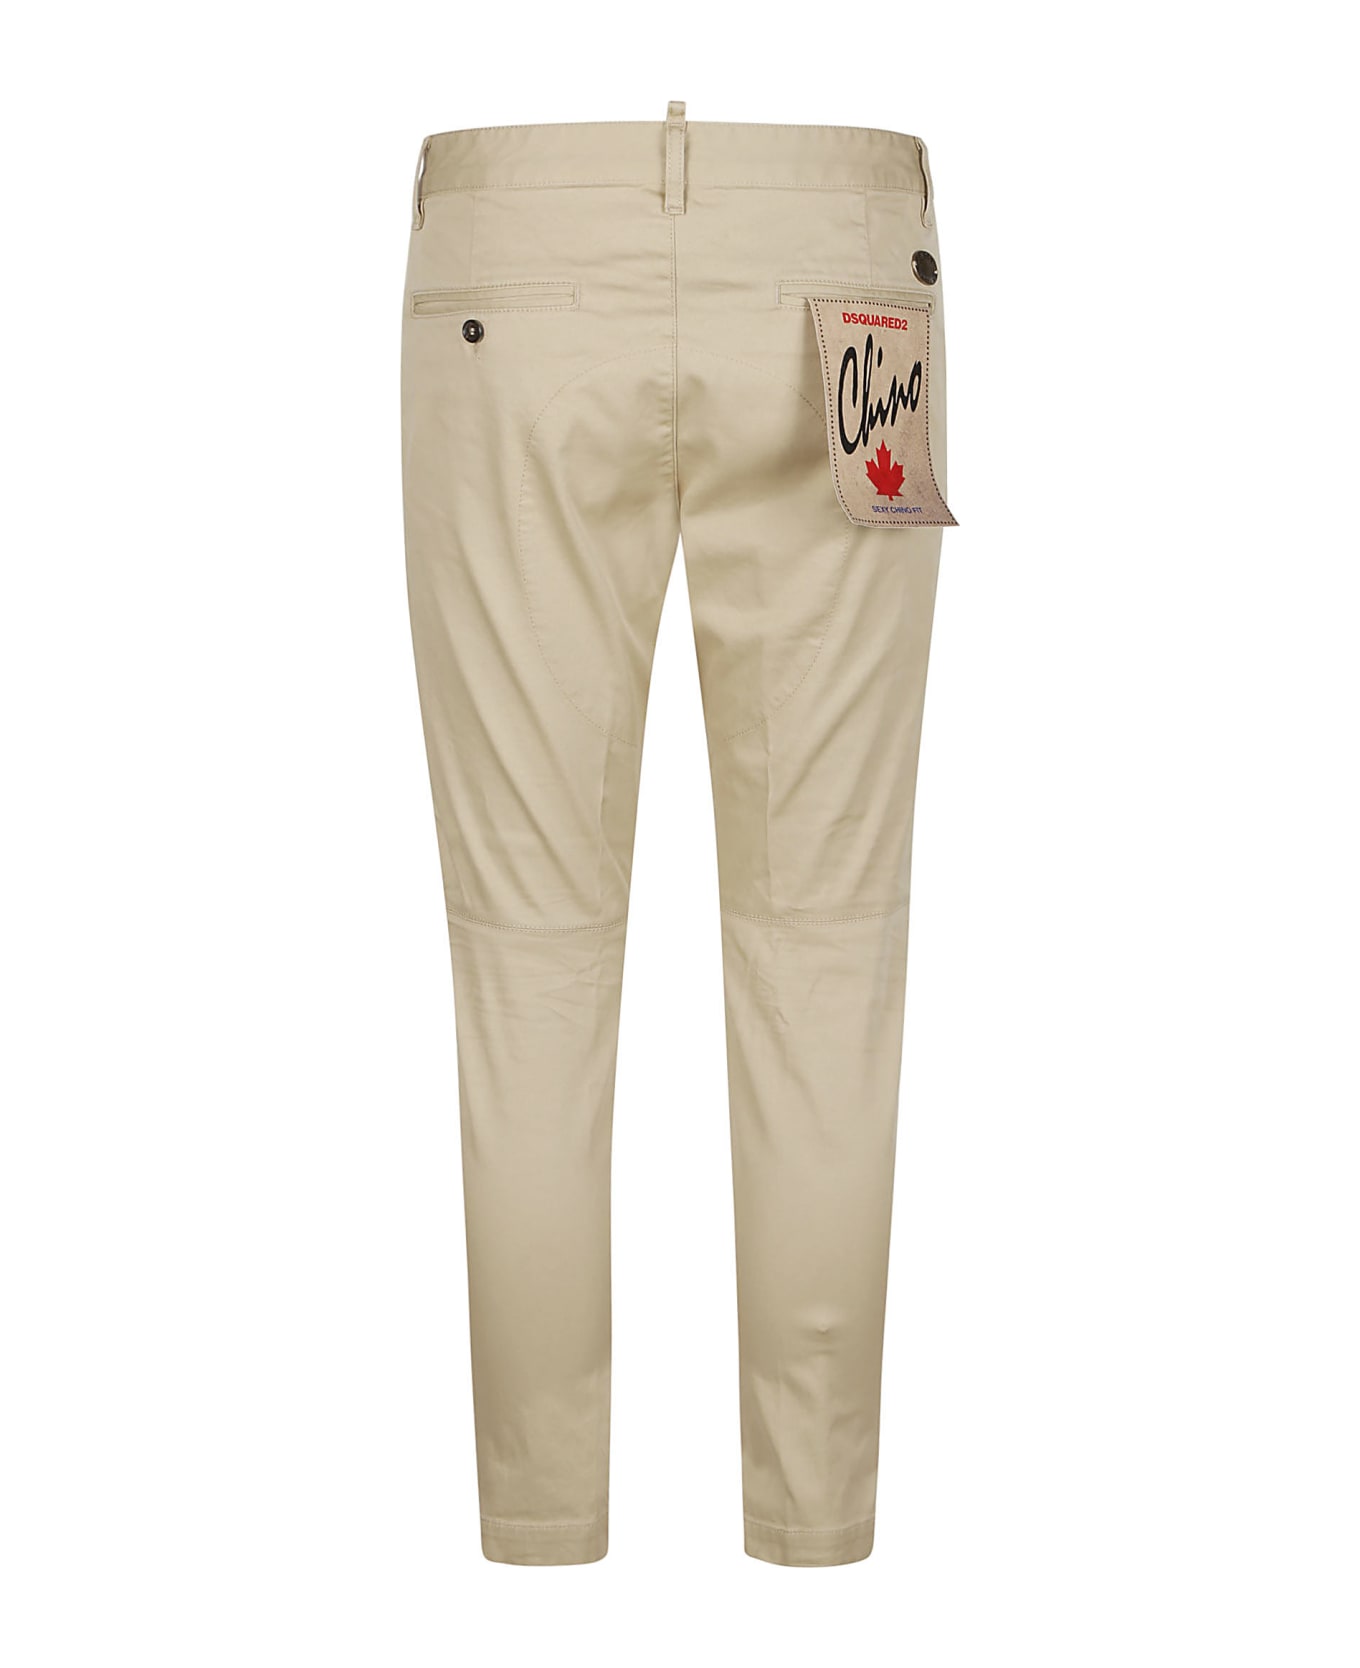 Dsquared2 Sexy Chino Pant - Beige ボトムス